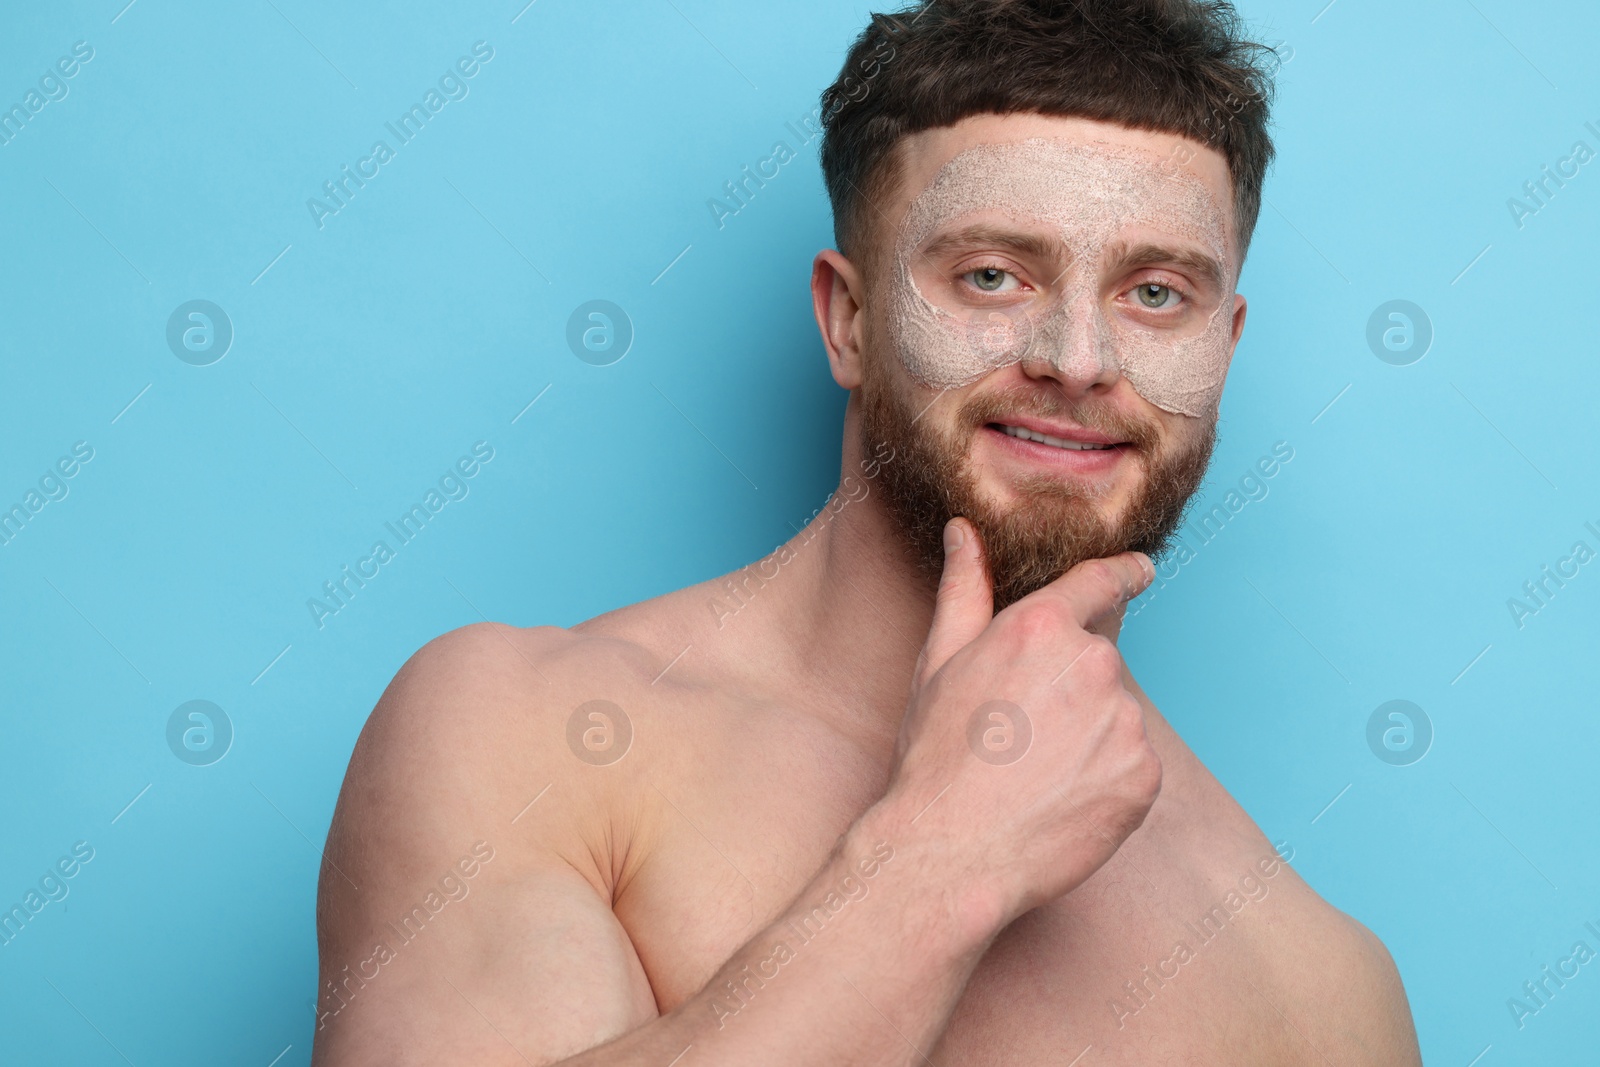 Photo of Handsome man with facial mask on his face against light blue background